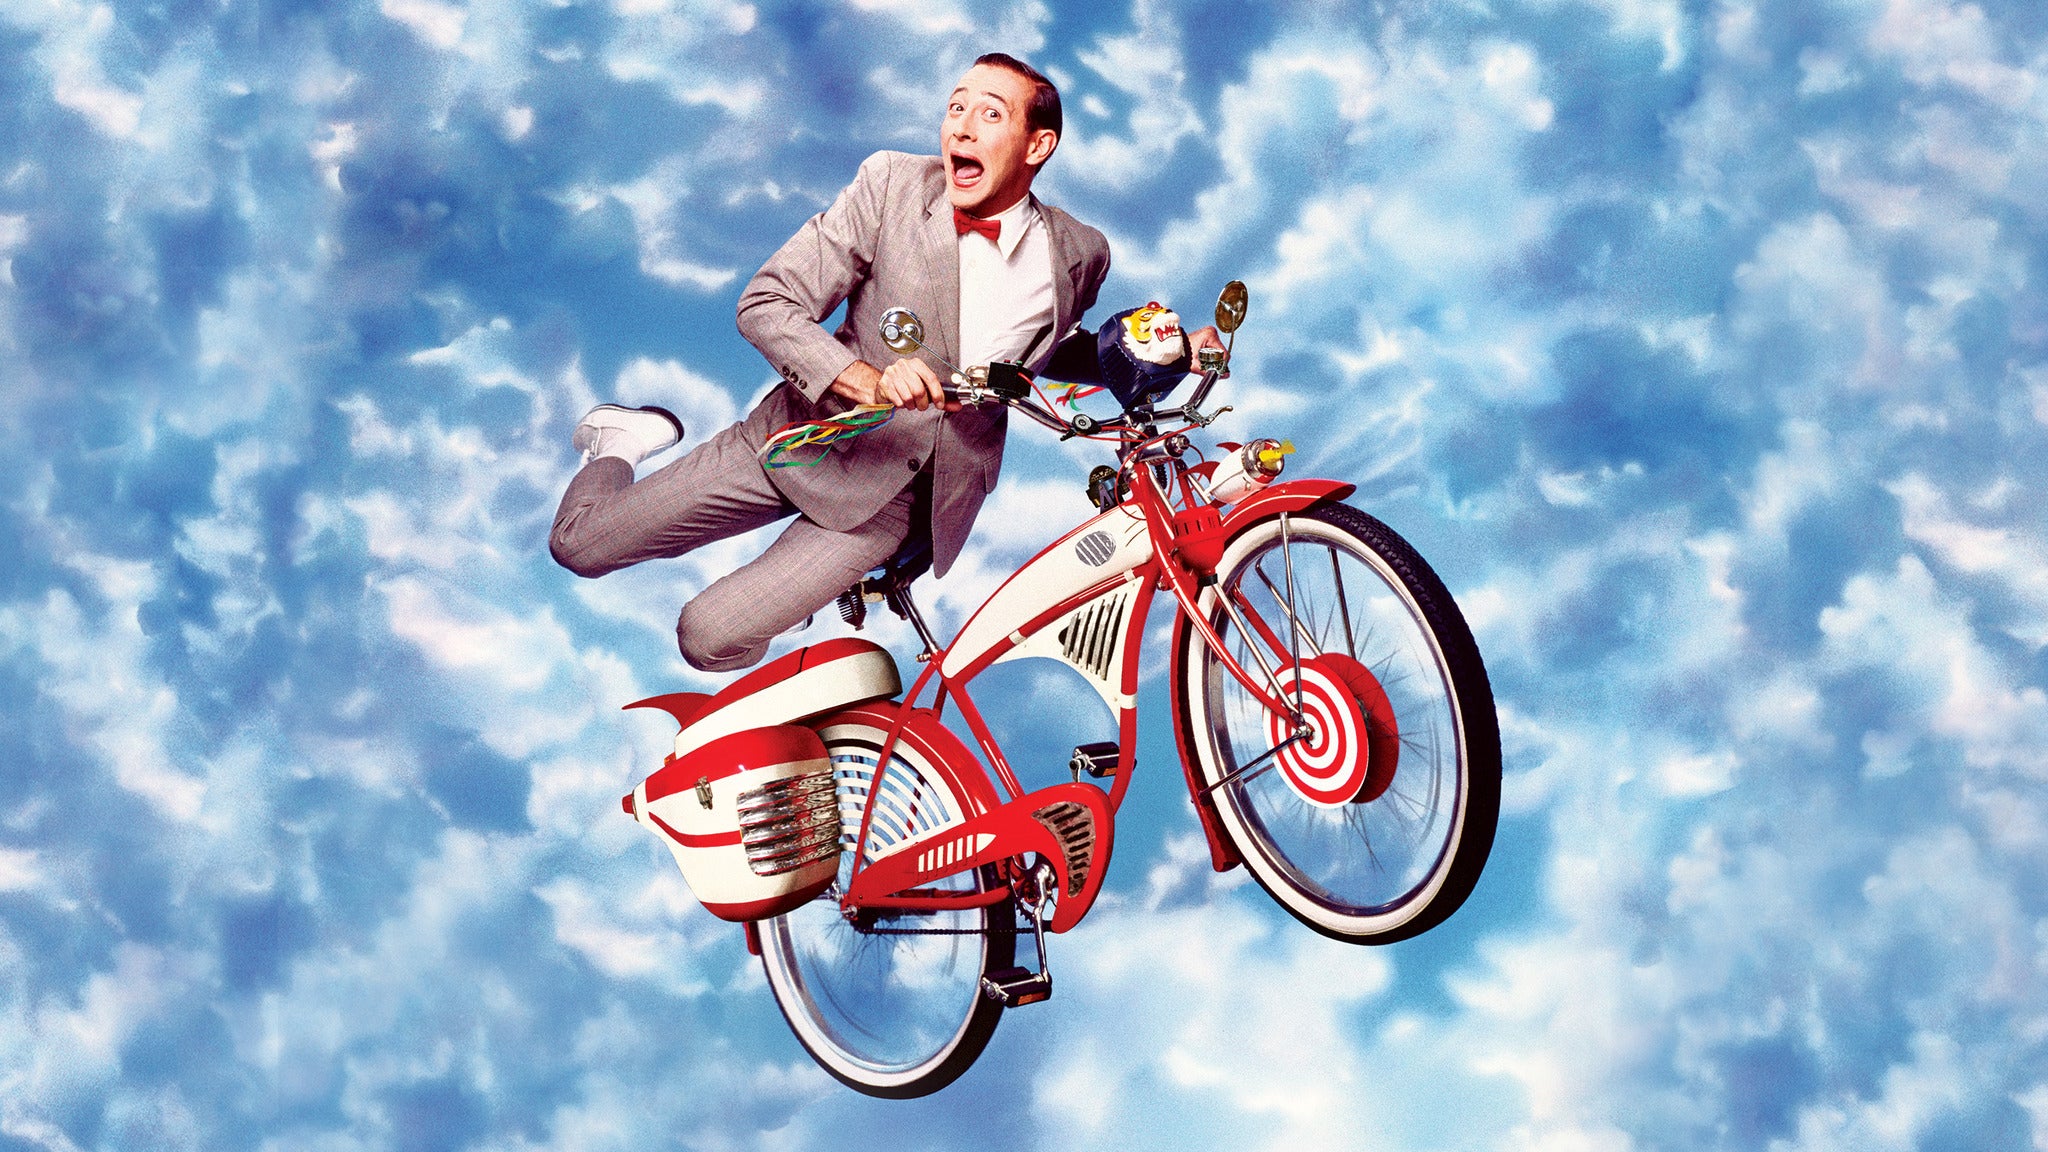 Pee-wee's Big Adventure 35th Anniversary Tour with Paul Reubens in Los Angeles promo photo for VIP Package Onsale presale offer code